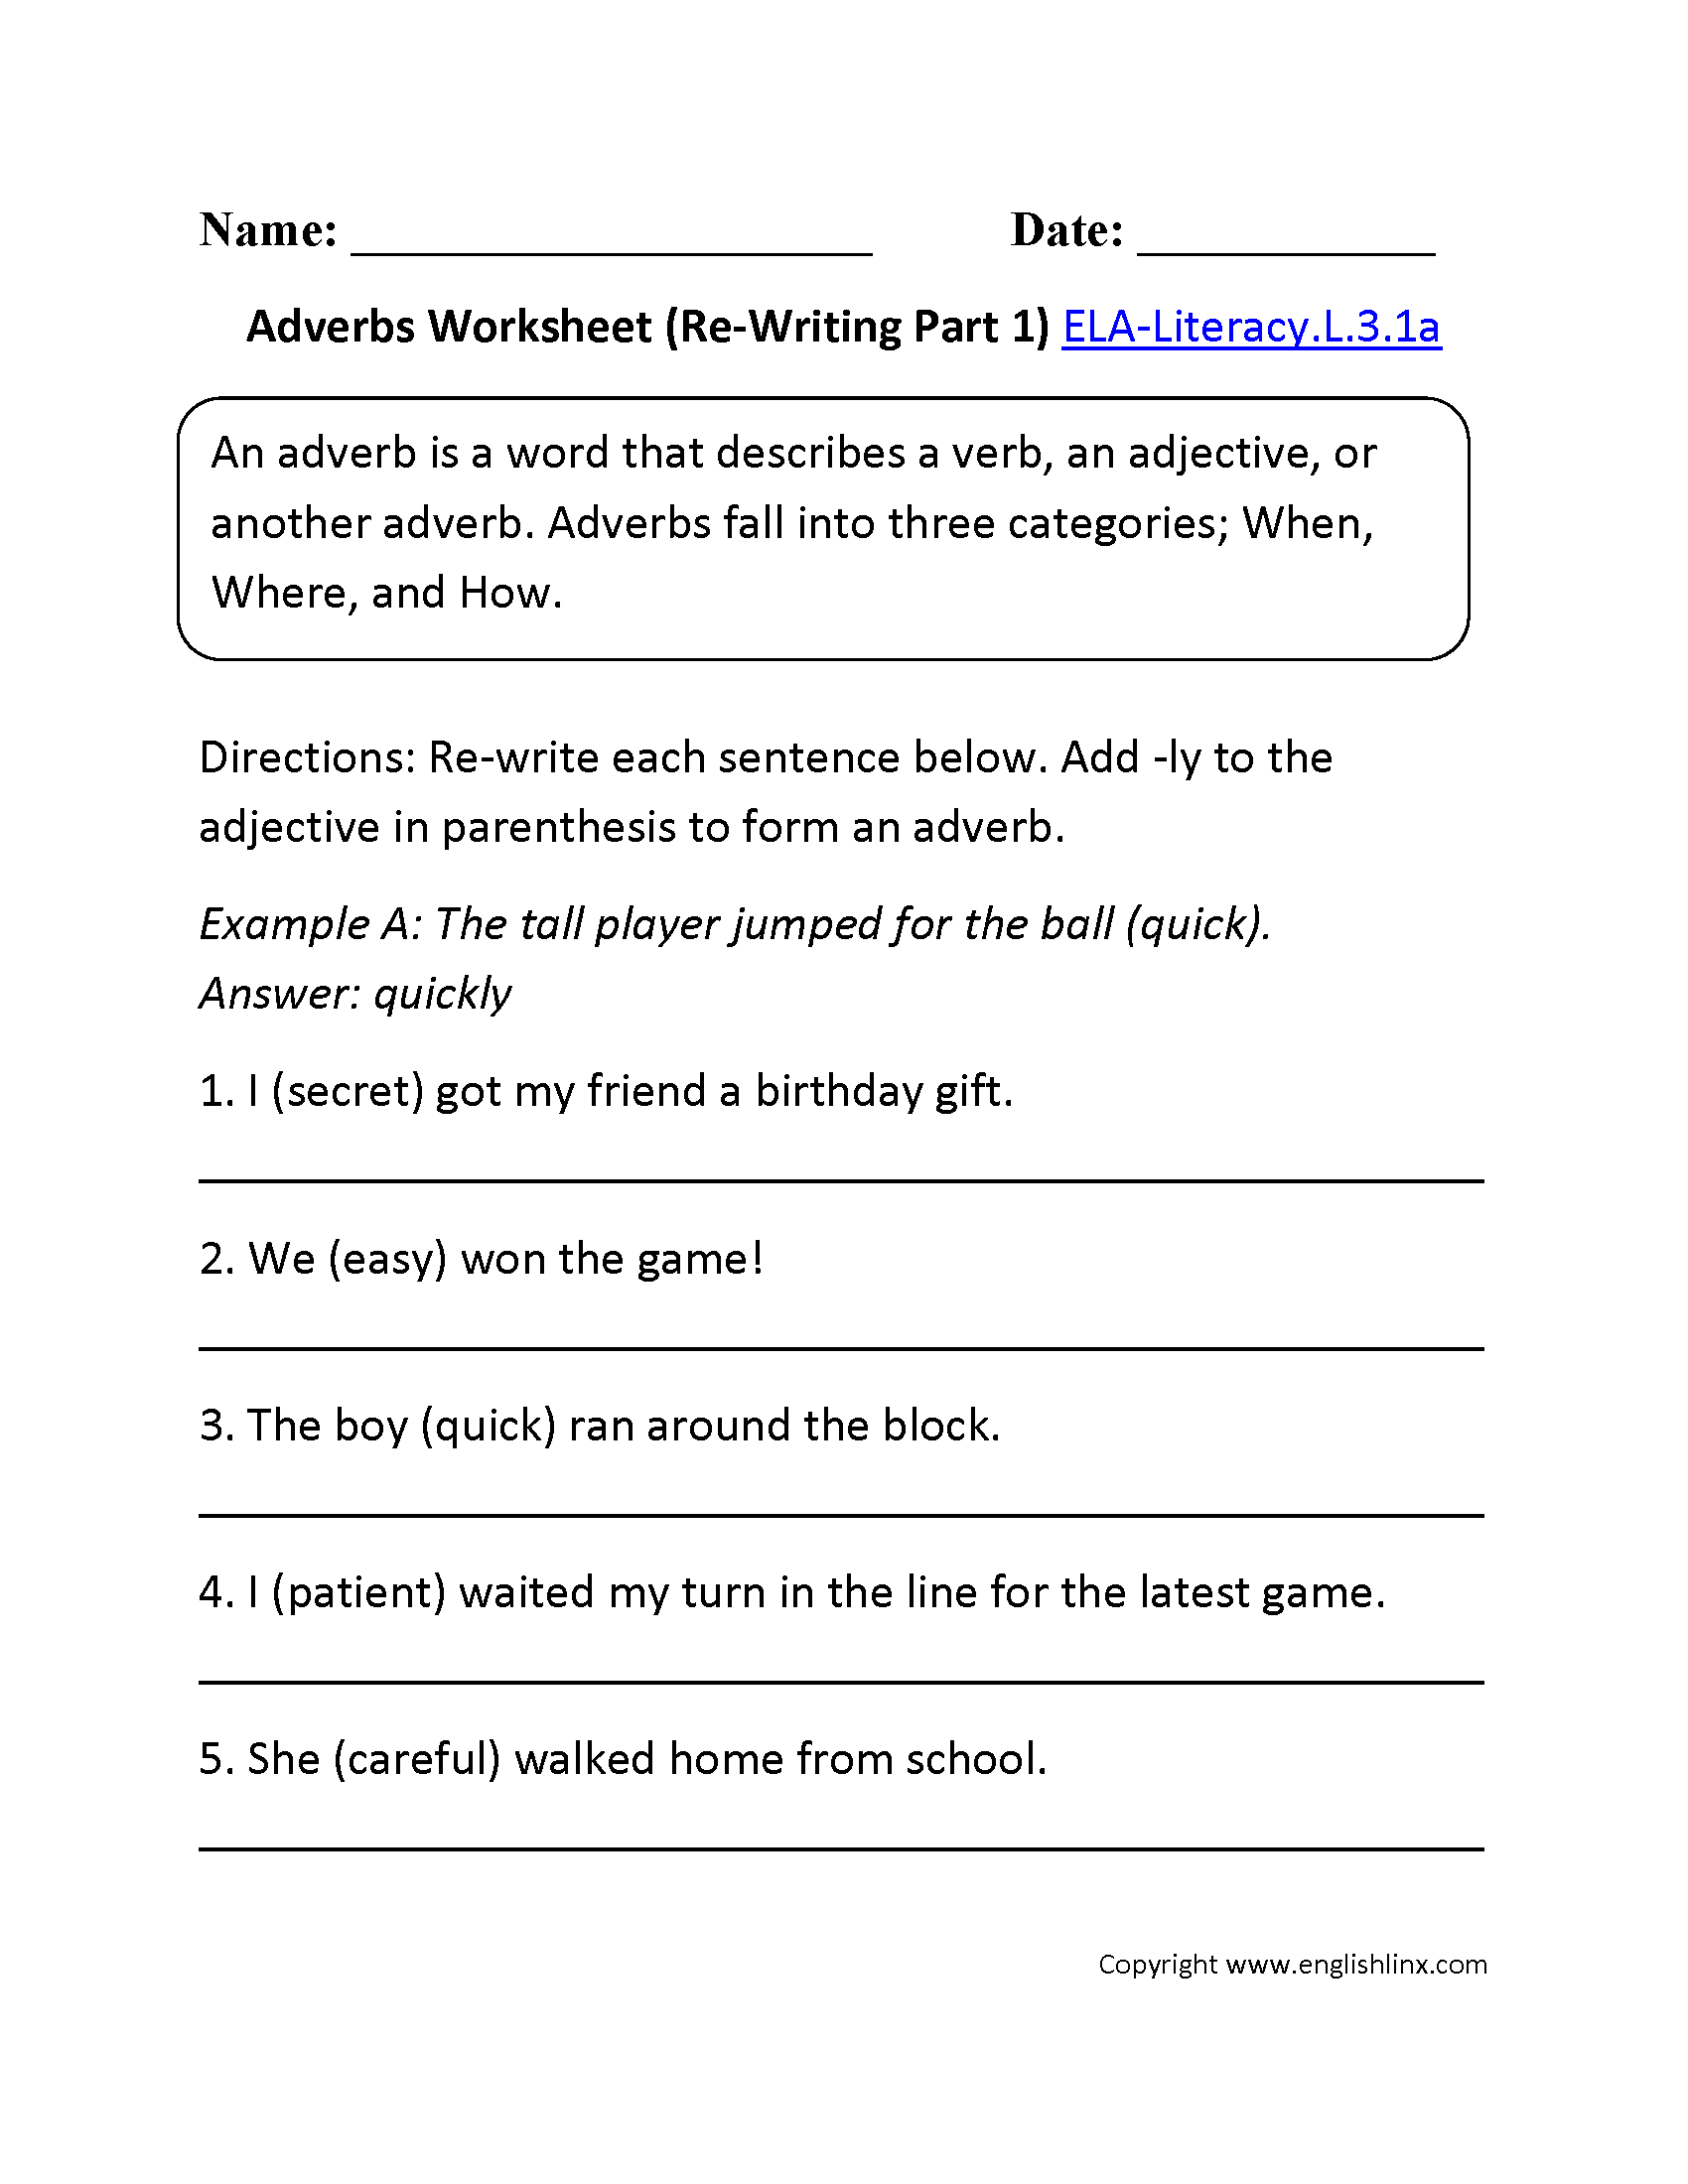 11 Best Images of Kinds Of Verbs Worksheet - Adverb Worksheets with